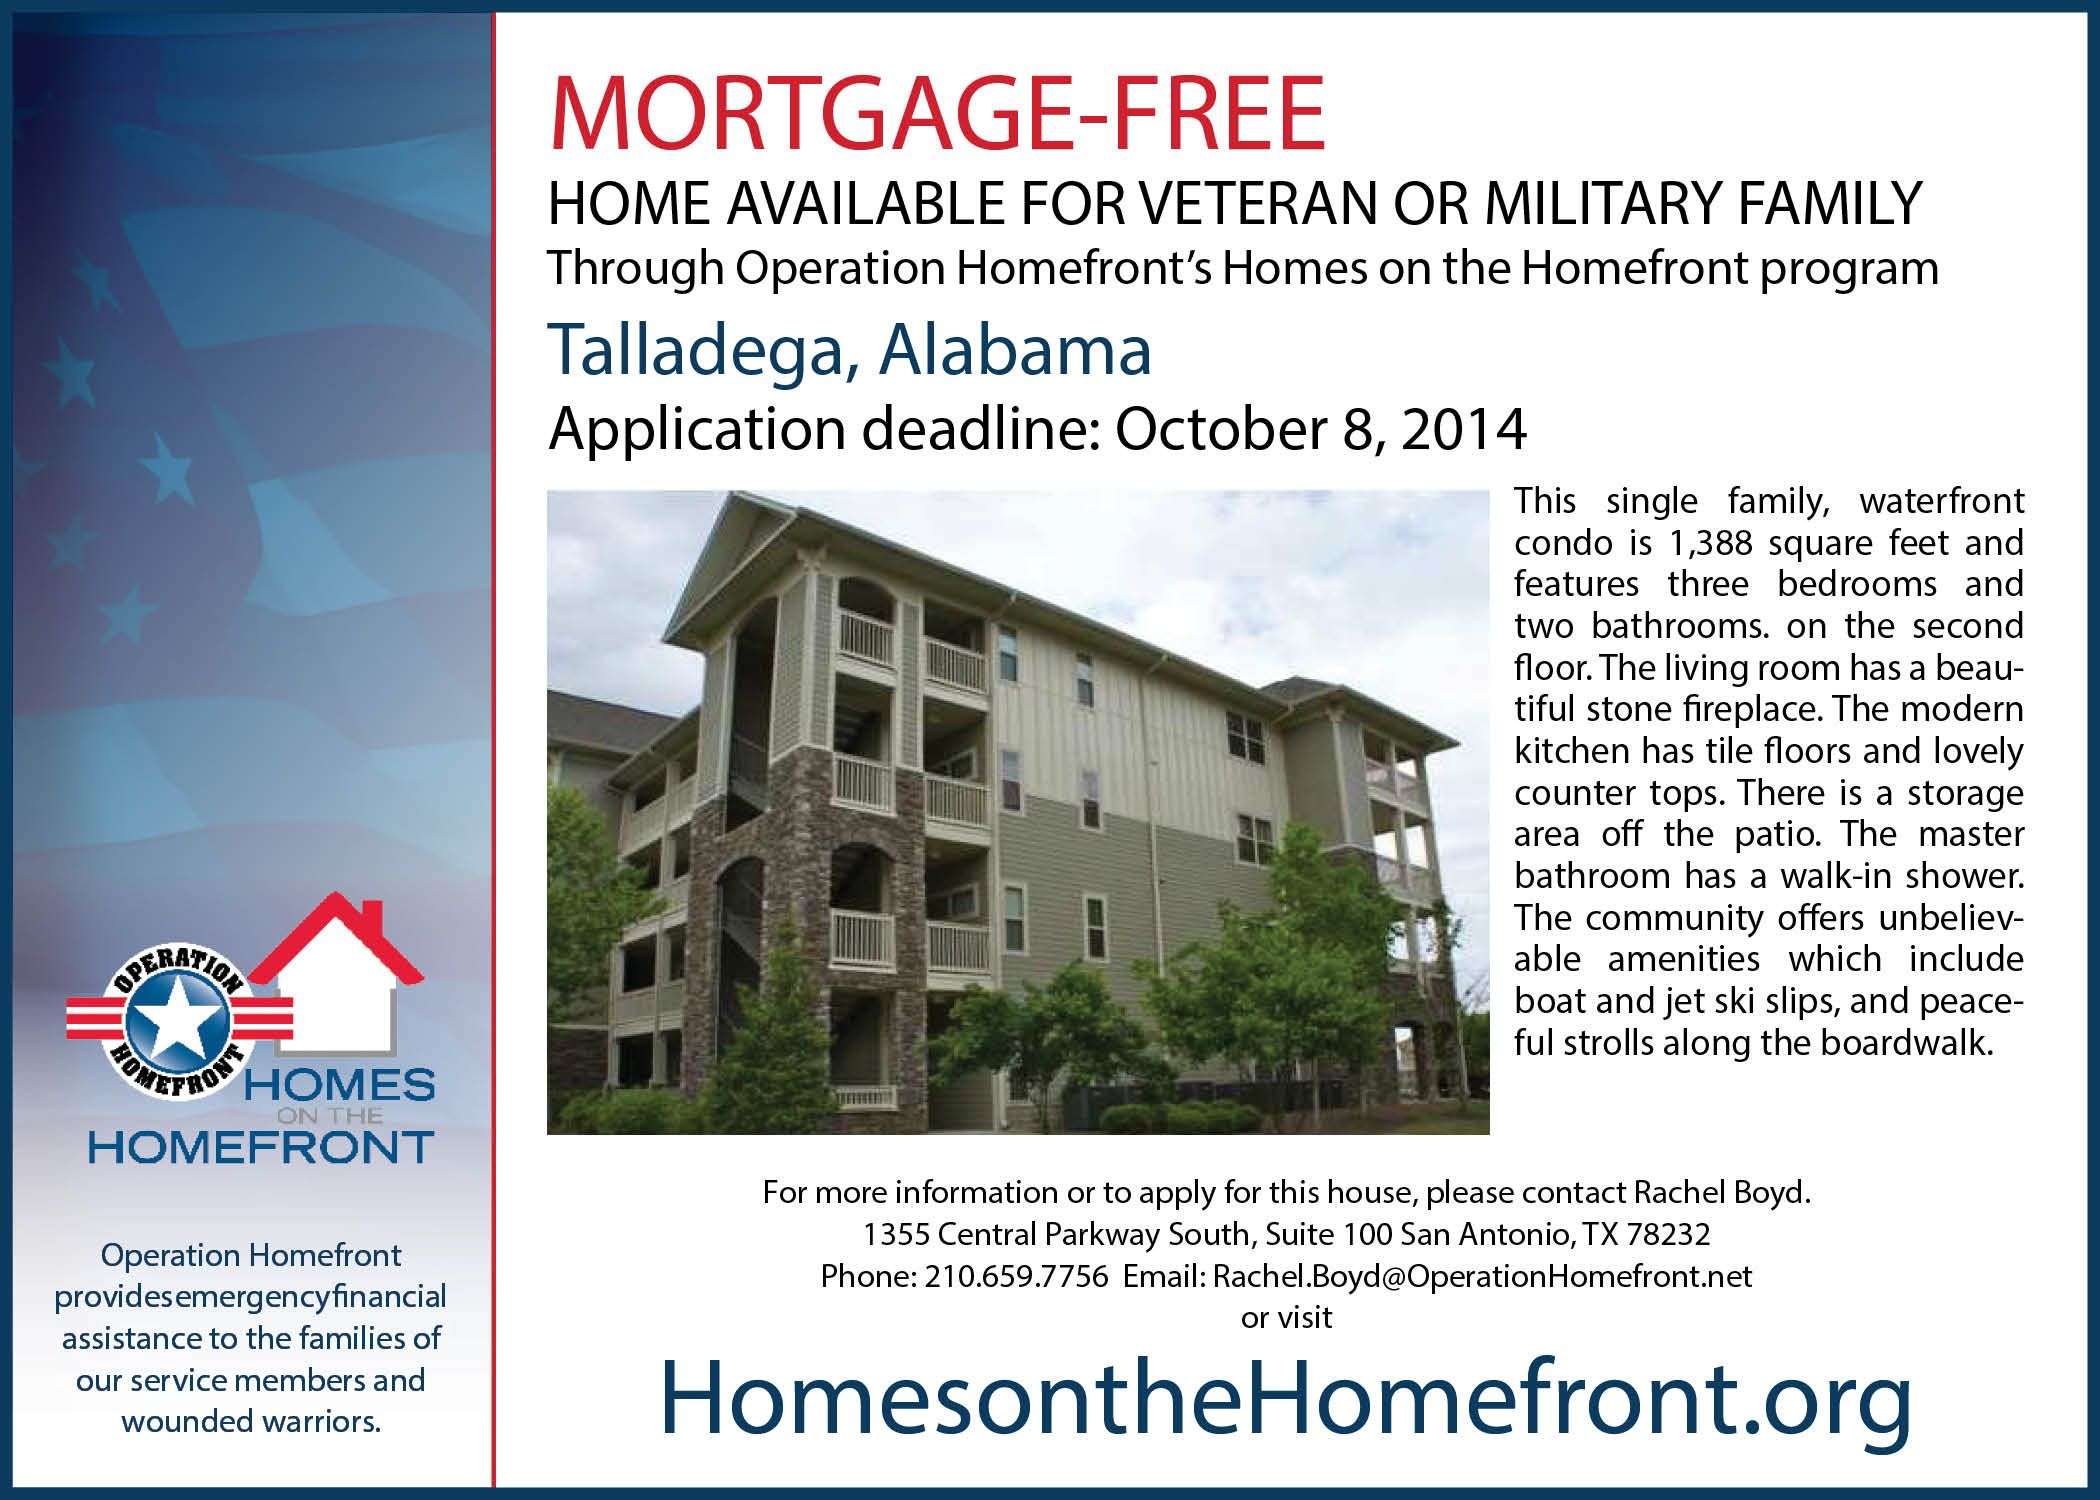 The application period for this mortgage free home in ...